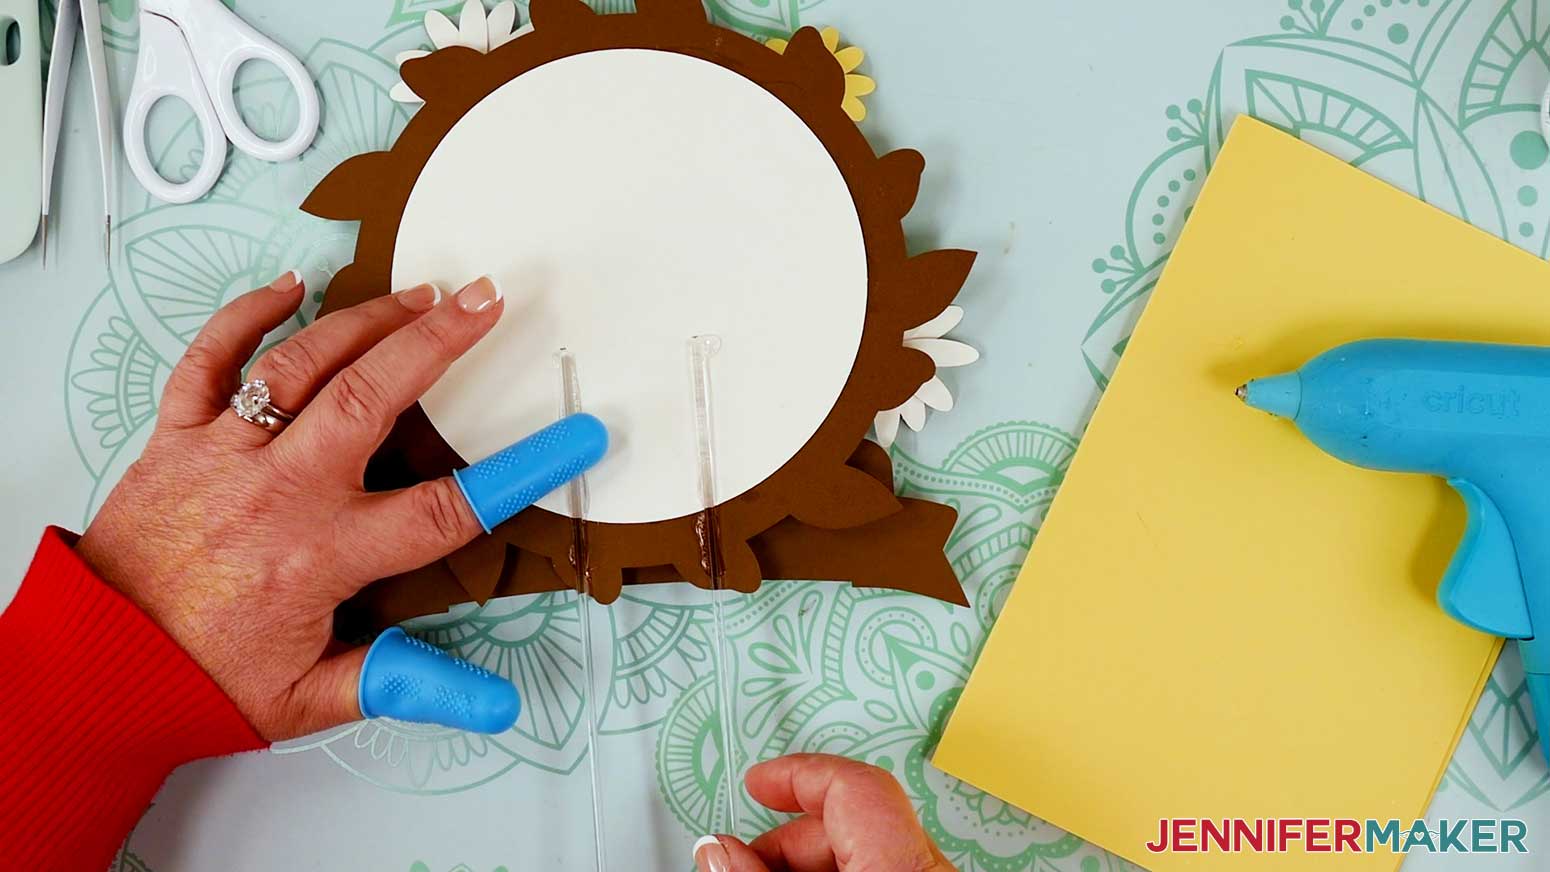 Use a hot glue gun to attach the clear acrylic sticks to the back of the cake topper.